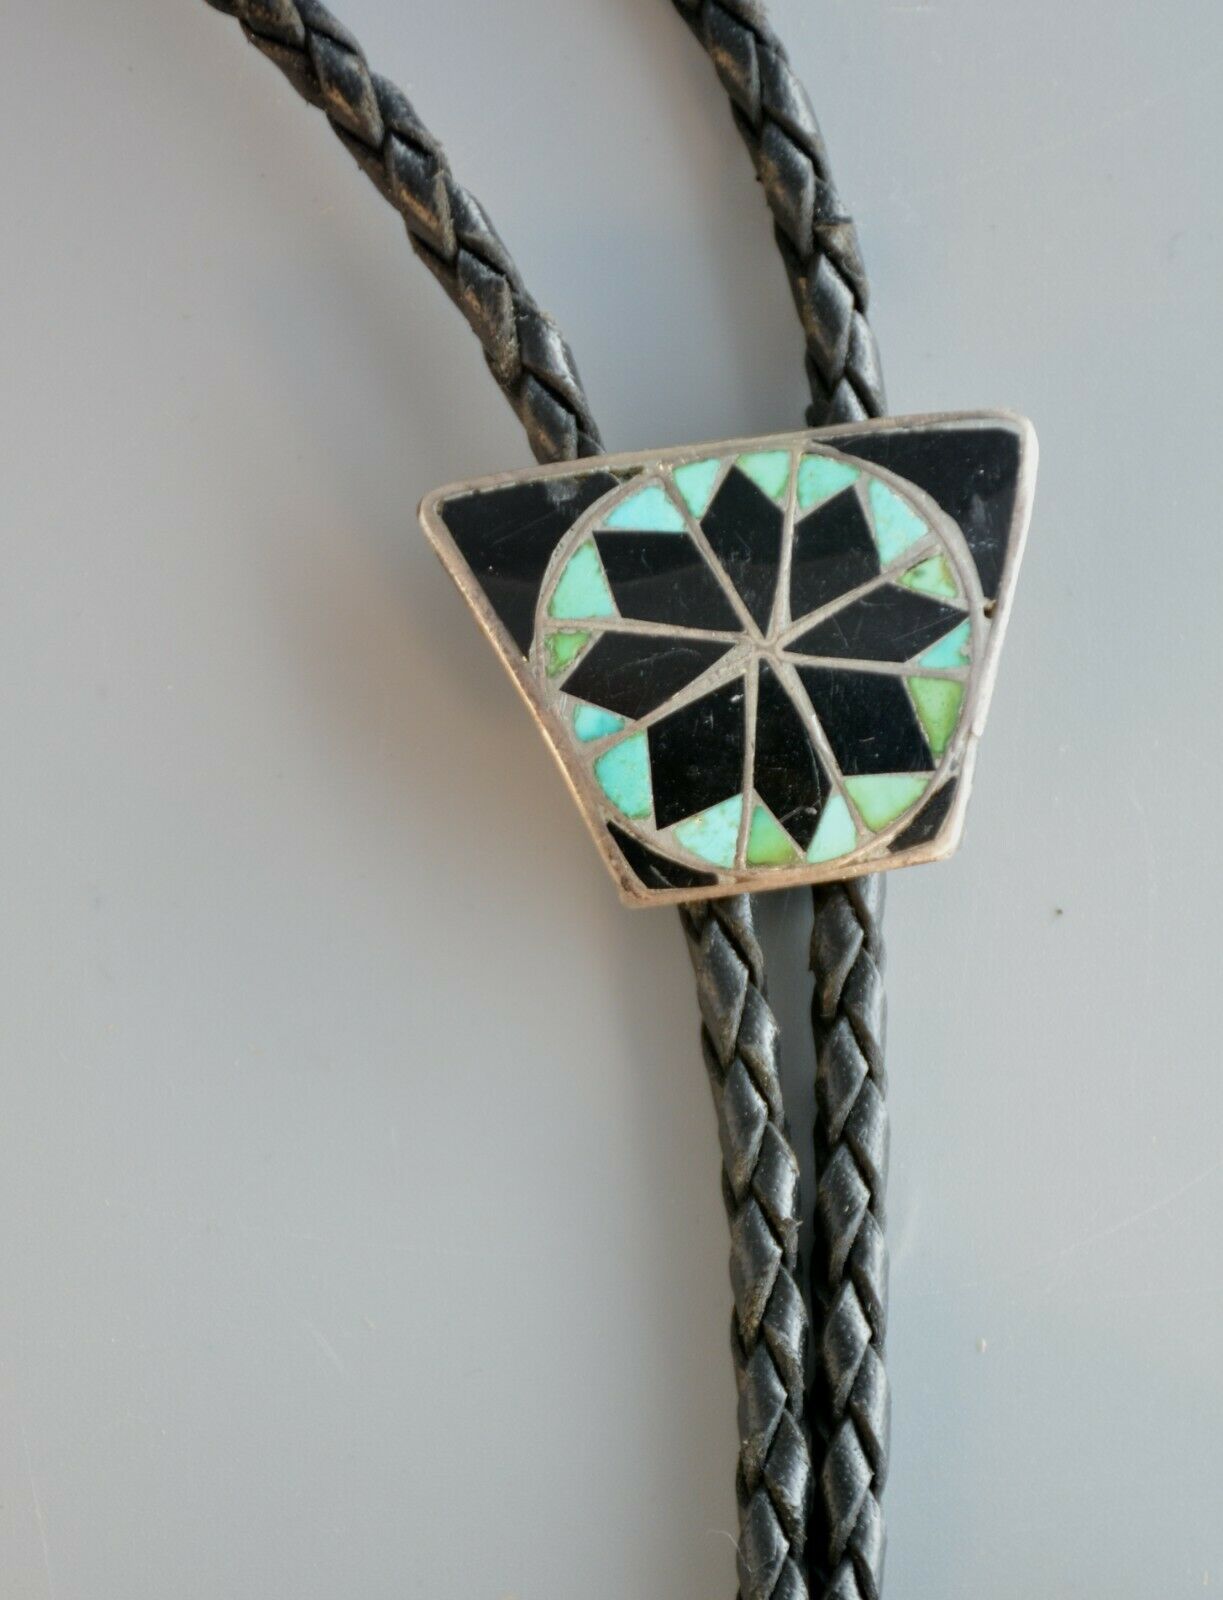 Vintage Zuni Silver Inlay Bolo Tie - Black 8 Pointed Star W. Turquoise